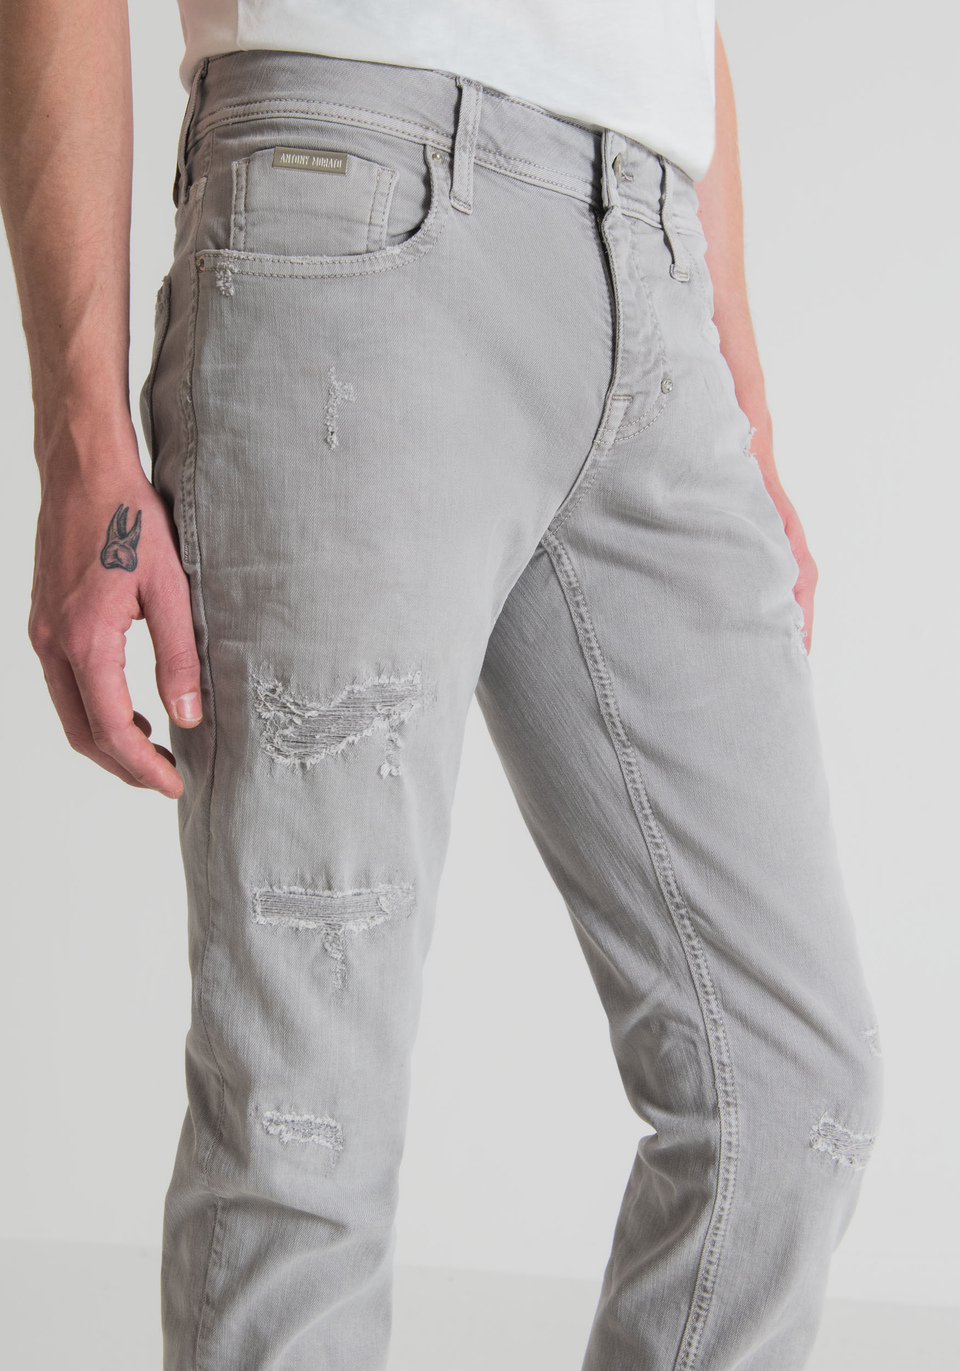 "OZZY" TAPERED FIT JEANS IN STRETCH DENIM WITH STONE WASH AND ABRASIONS - Antony Morato Online Shop